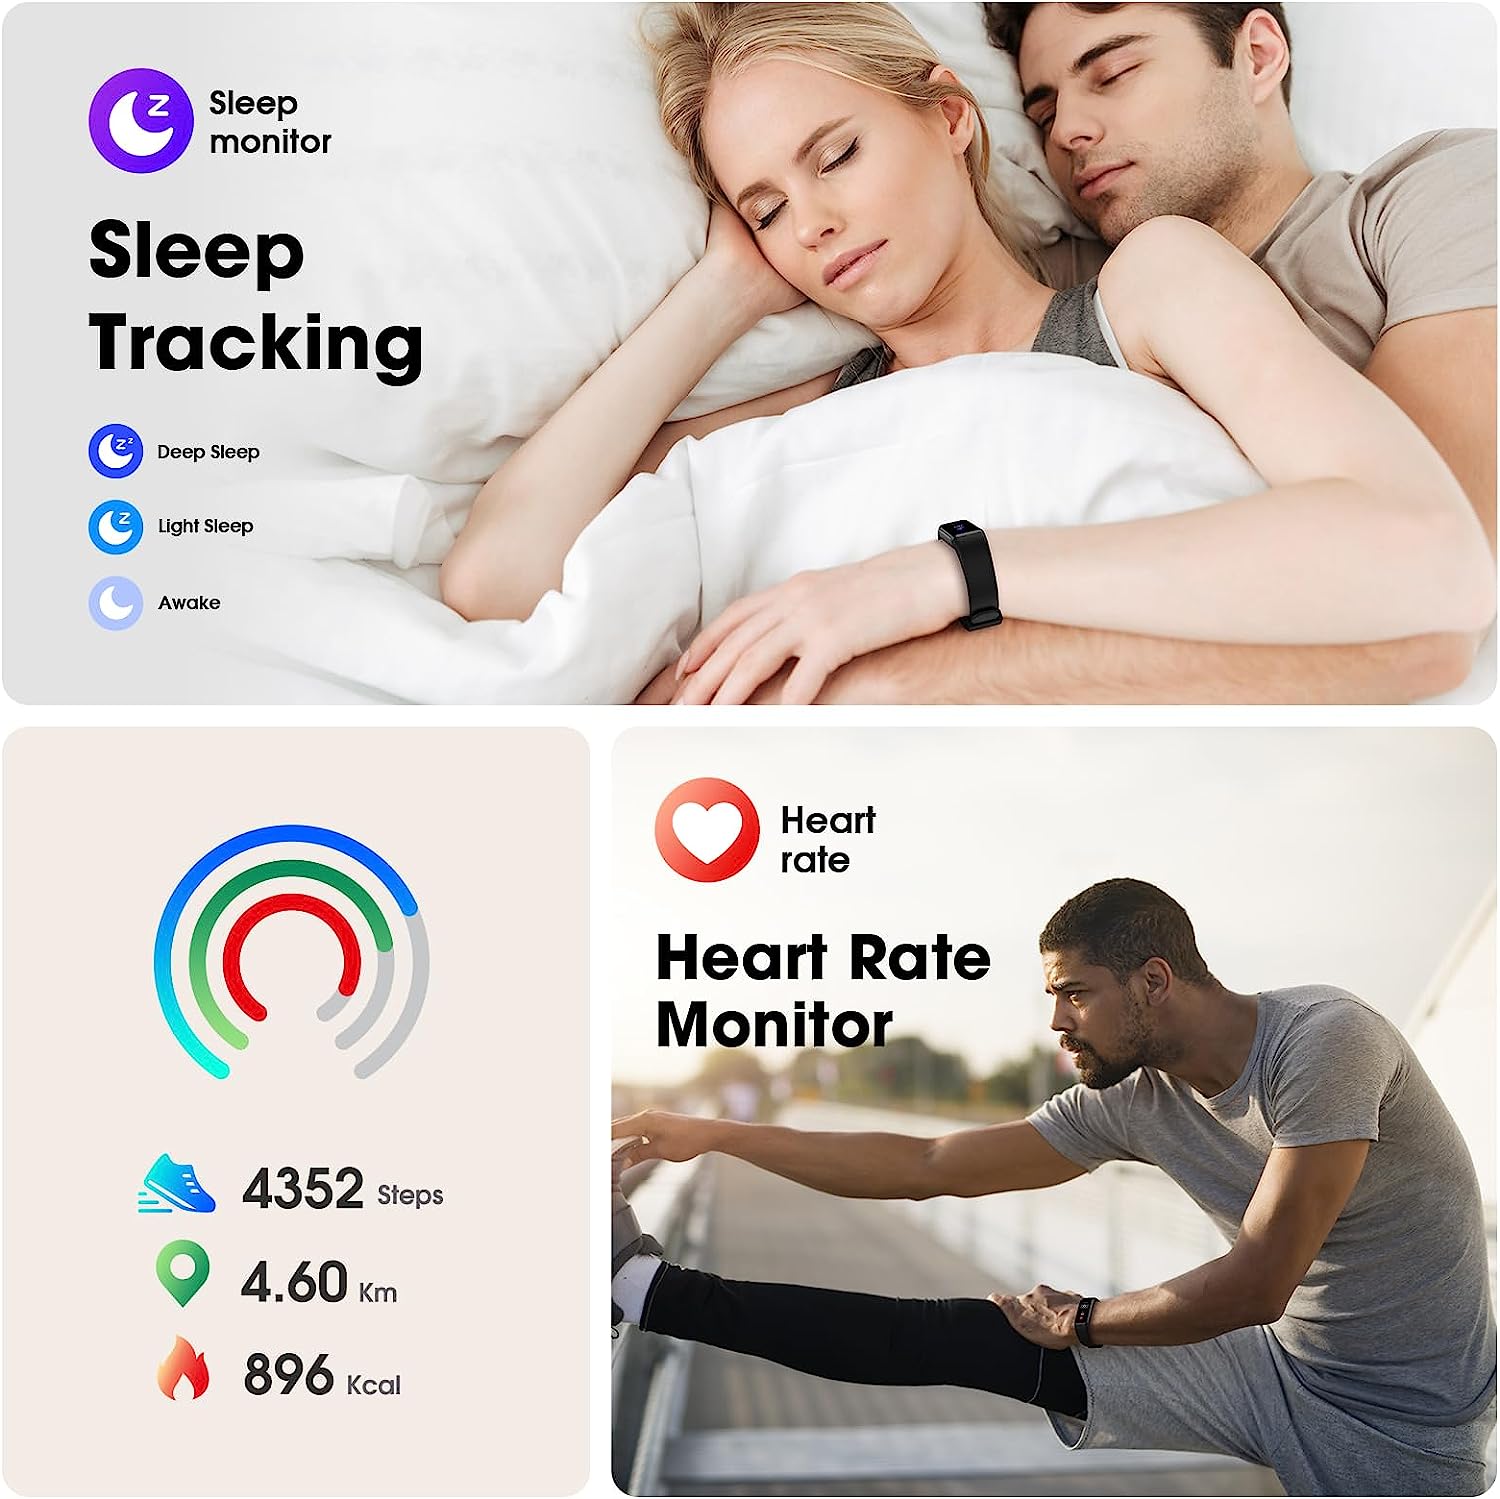 LIVIKEY Fitness Tracker Watch with Heart Rate Monitor, Step Counter IP67 Waterproof Activity Tracker with Pedometer & Sleep Monitor, Calories, Step Tracking for Women Men Compatible with Android iOS